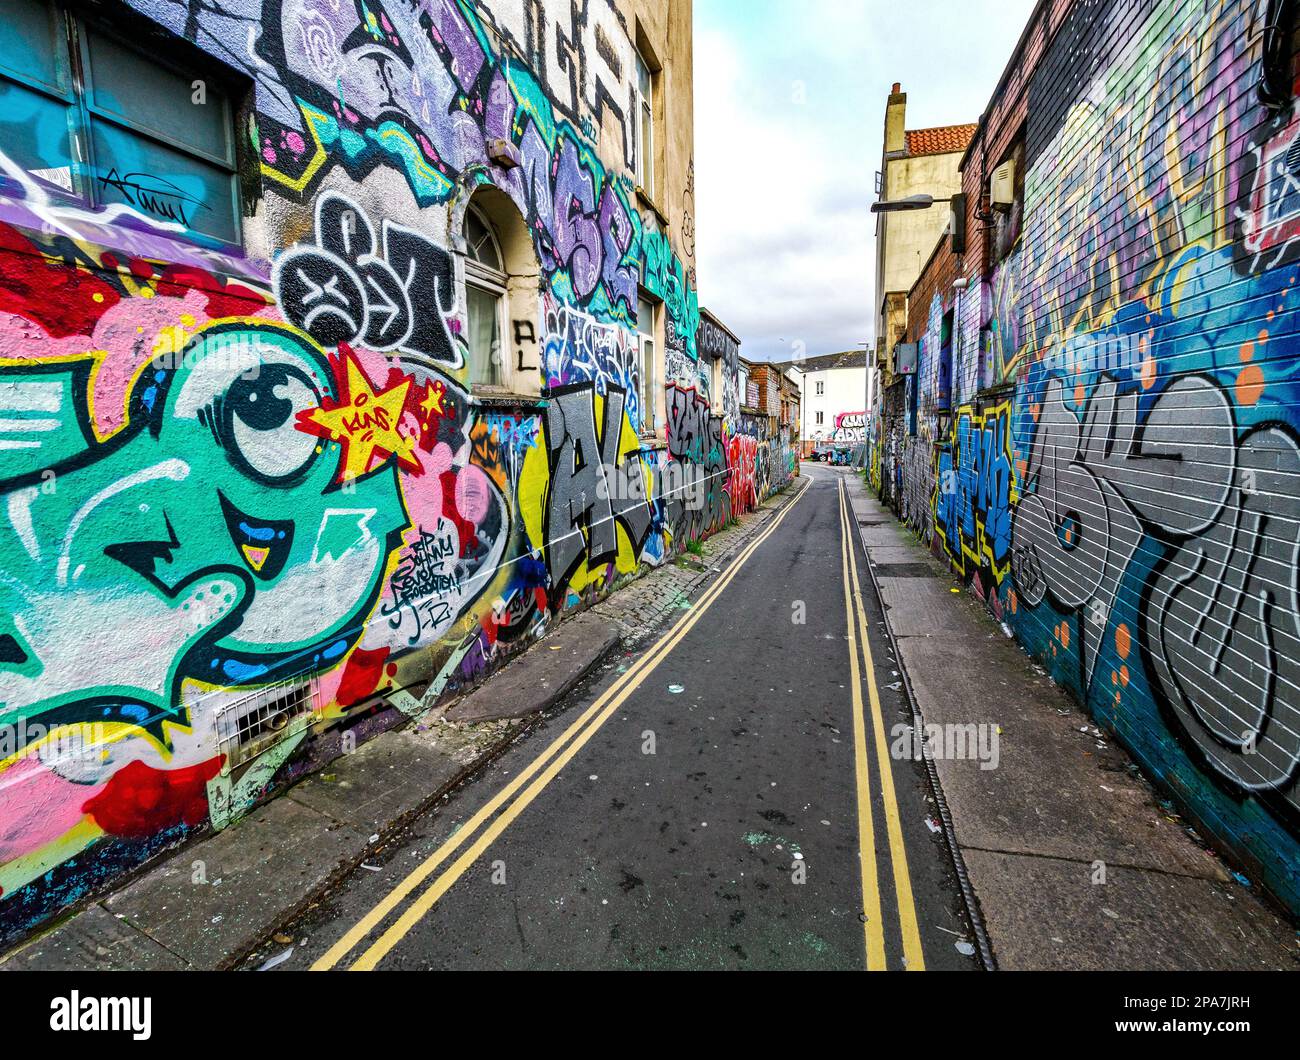 Graffiti covered walls of a narrow alley in the Stokes Croft area of Bristol UK Stock Photo